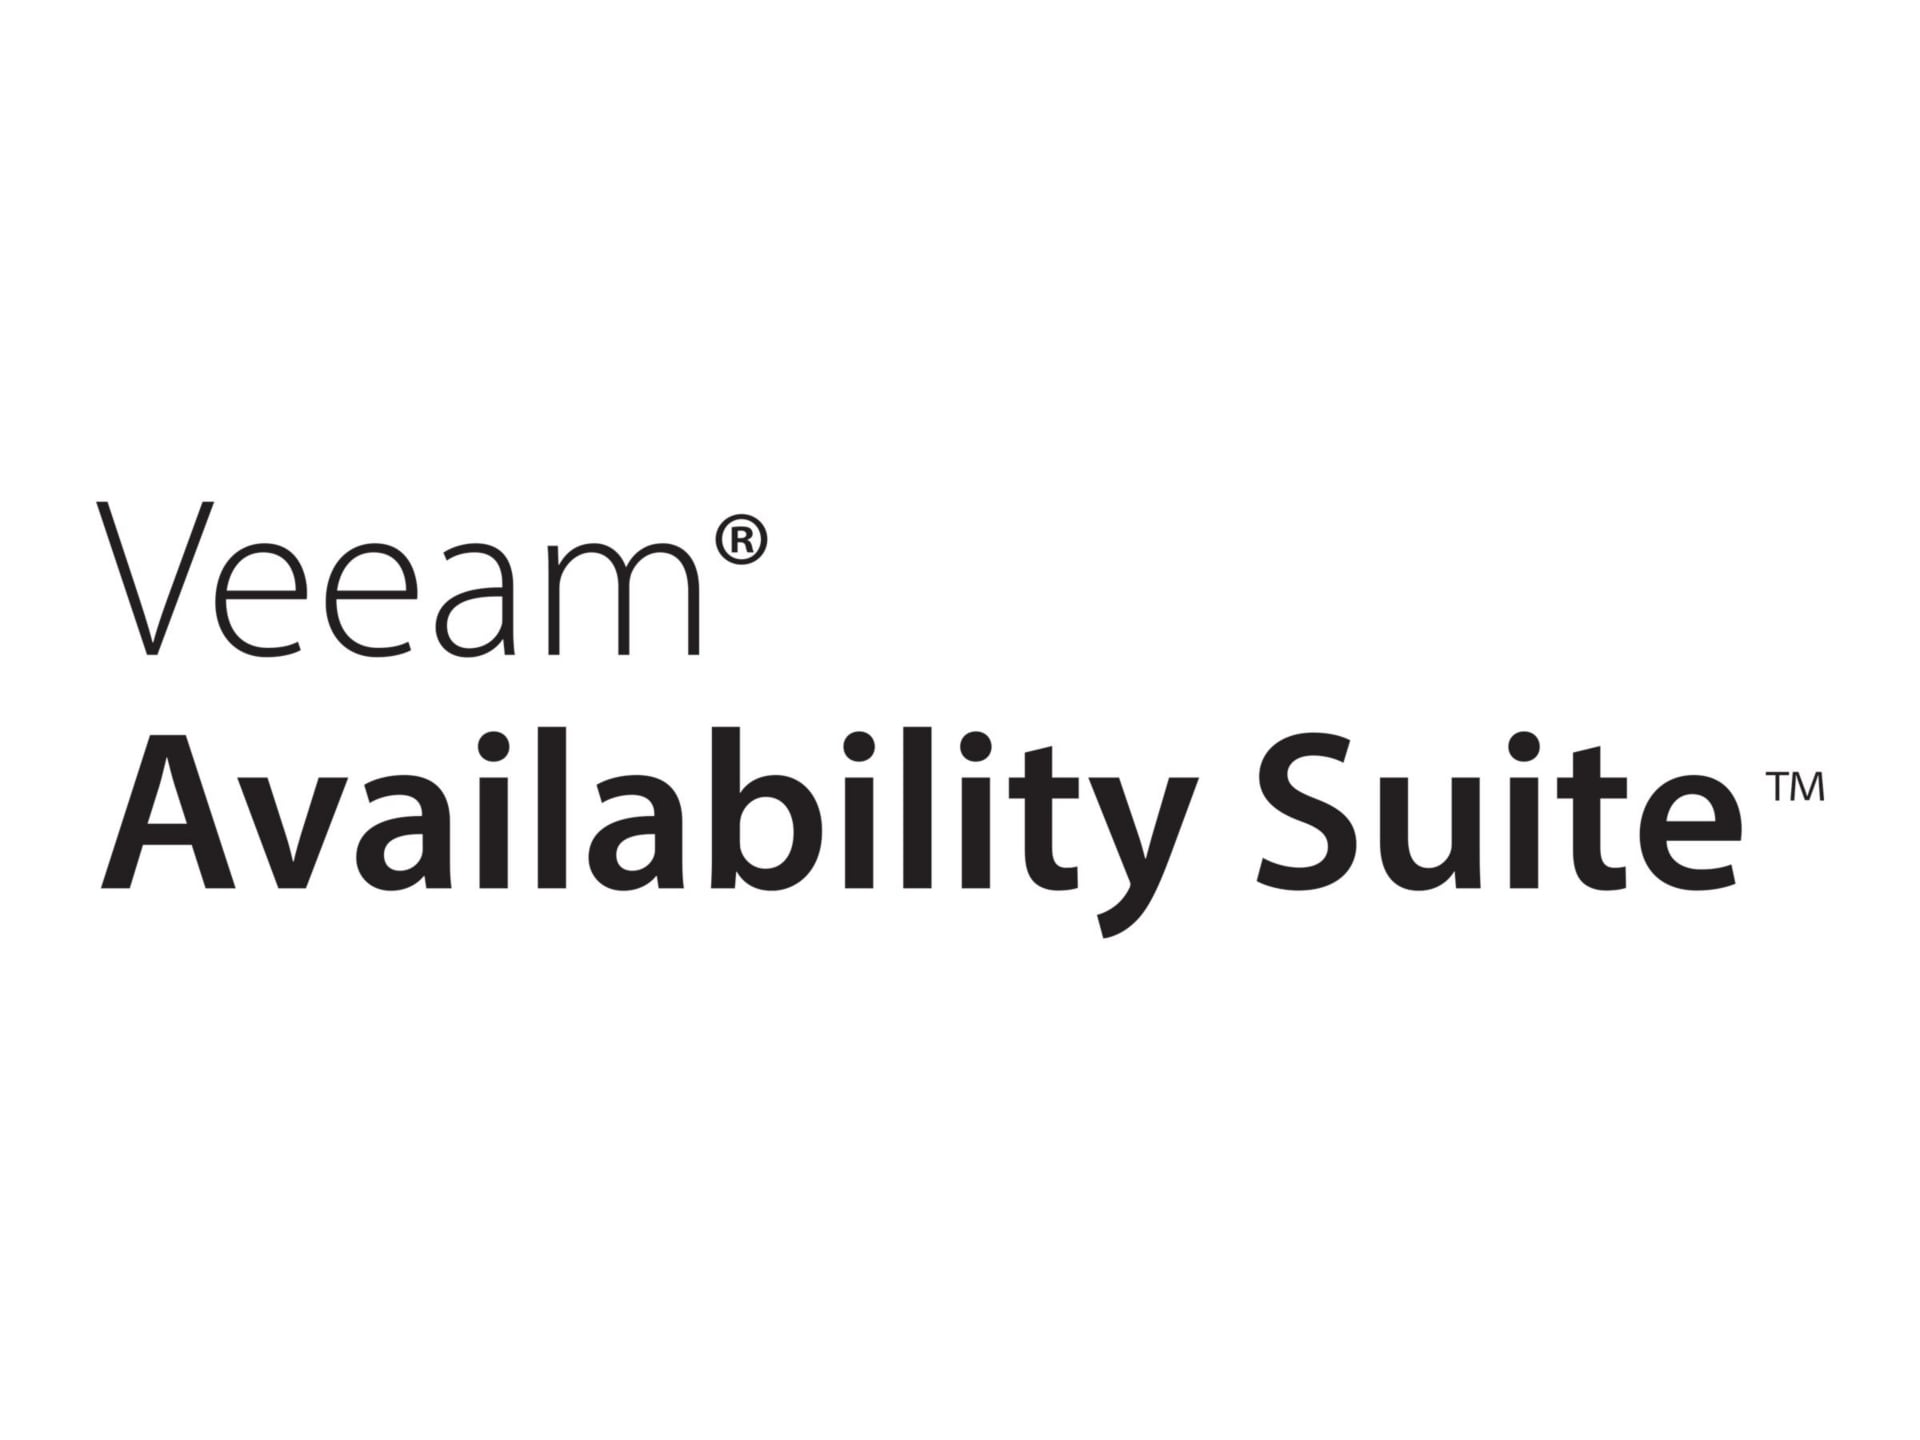 Veeam Premium Capacity Pack - Upfront Billing License (1 month) + Production Support - 1 TB increments